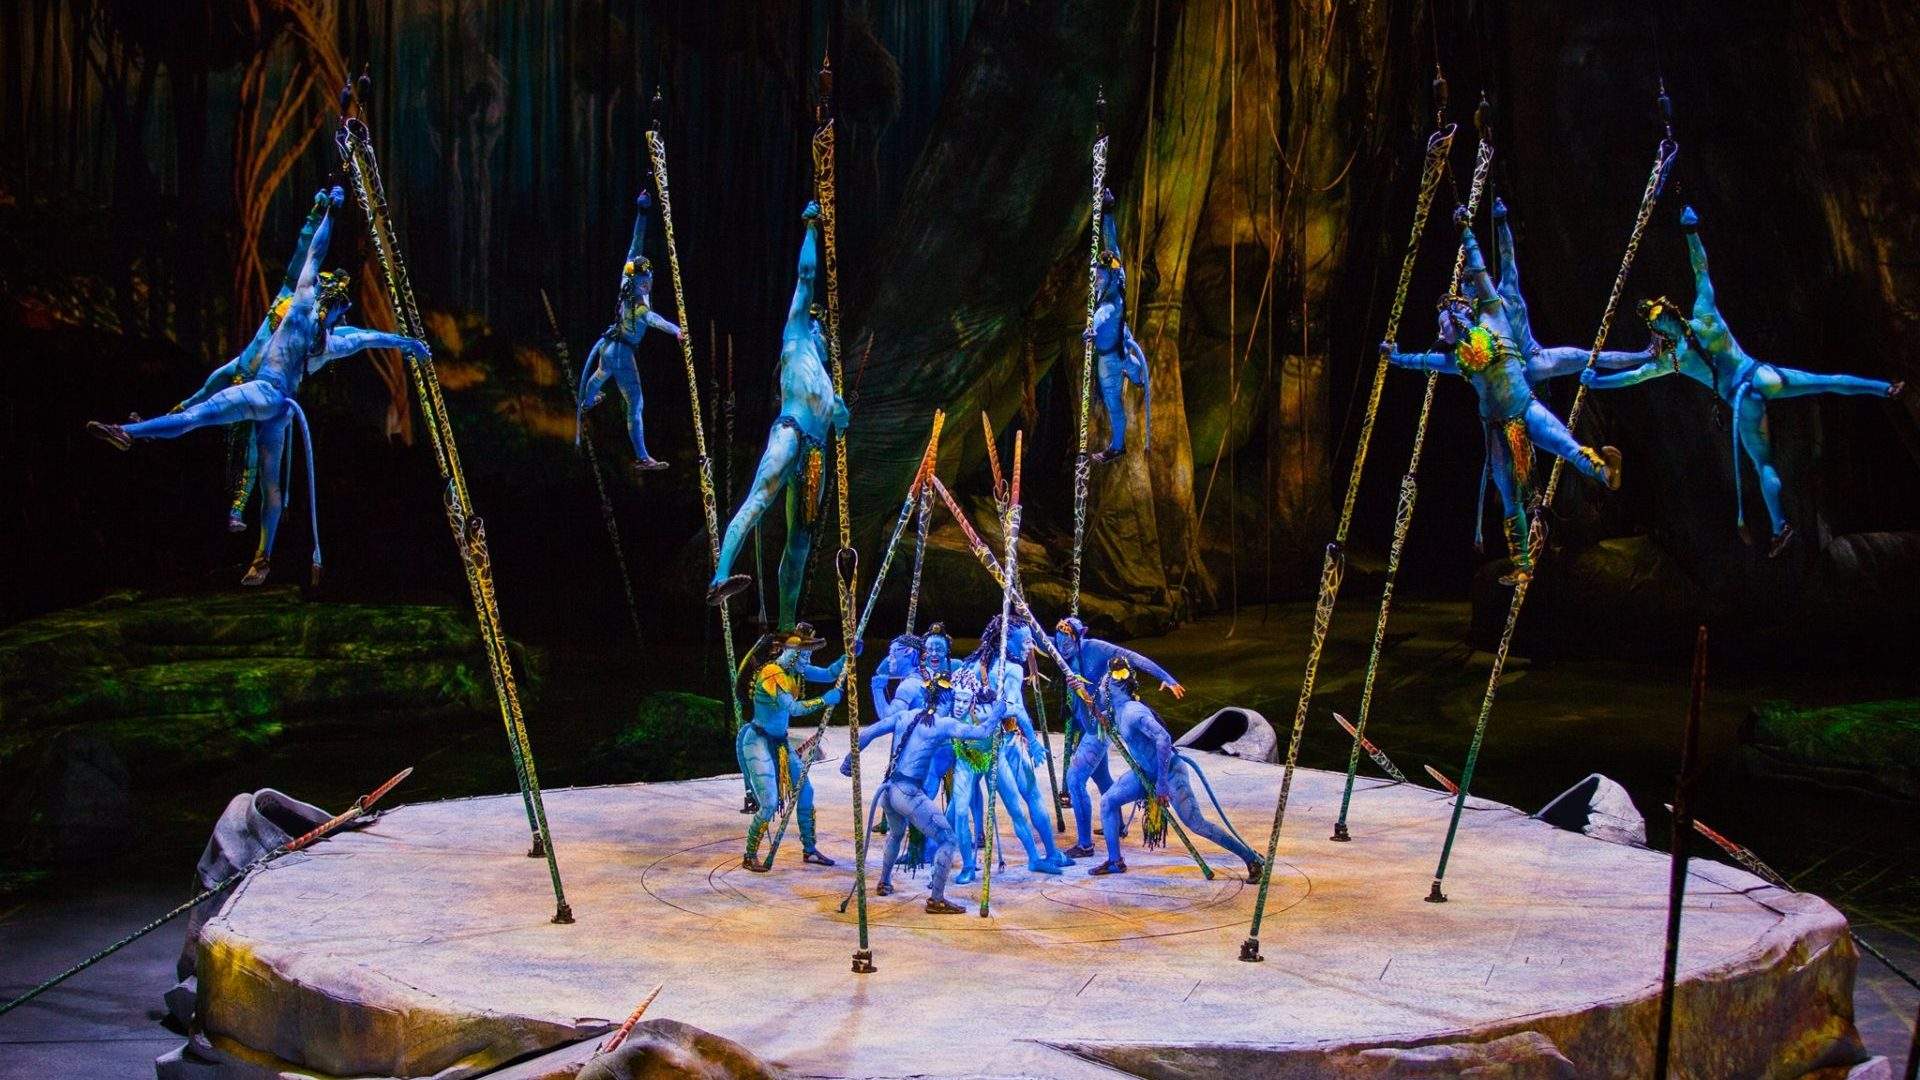 Cirque du Soleil's Avatar-Inspired Show is Coming to New Zealand